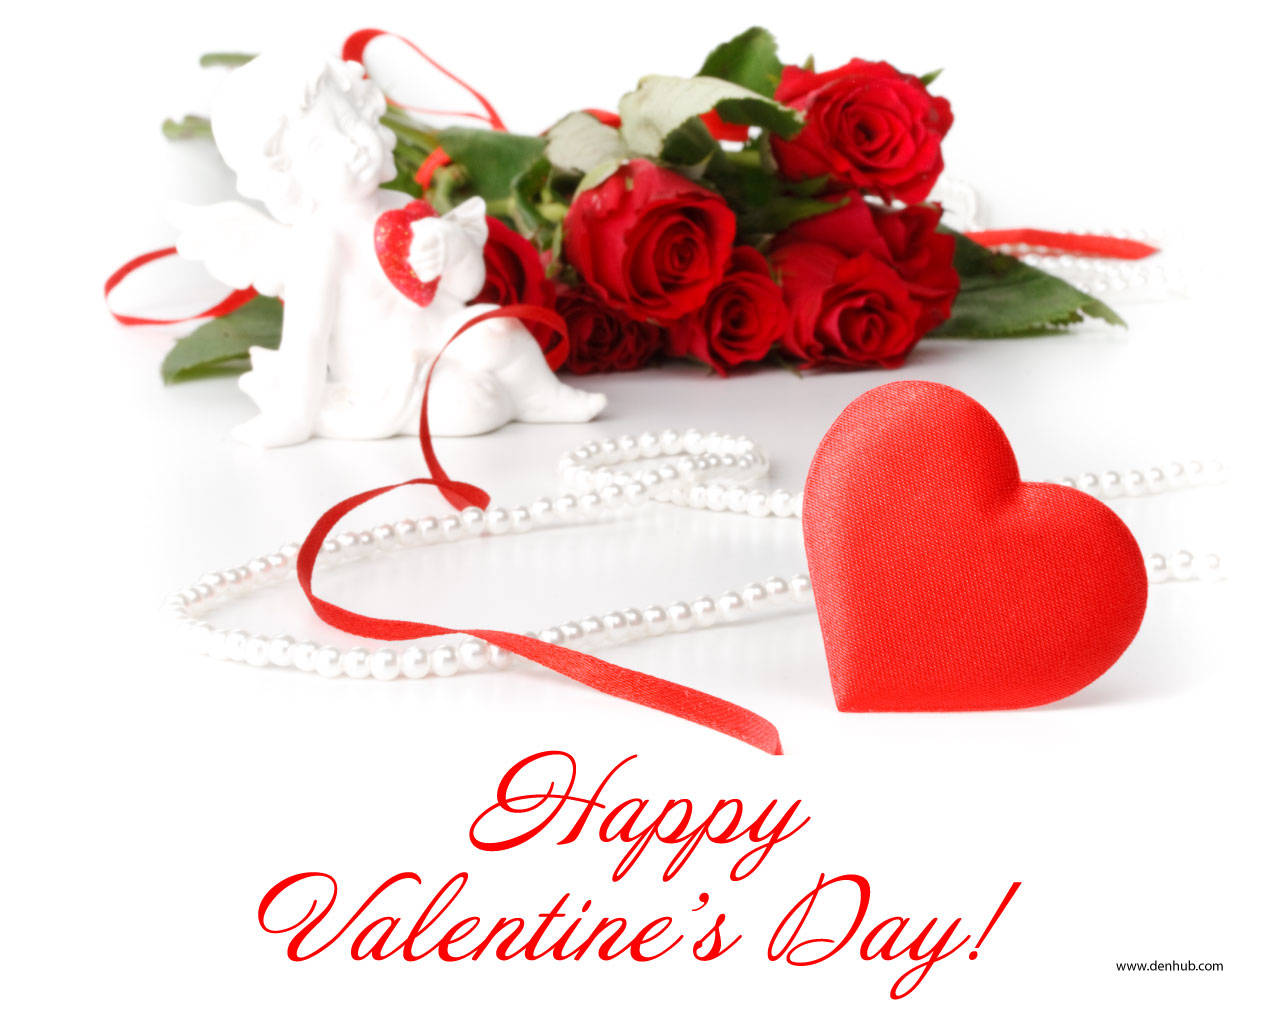 Valentine's Day Greetings And Red Roses Wallpaper